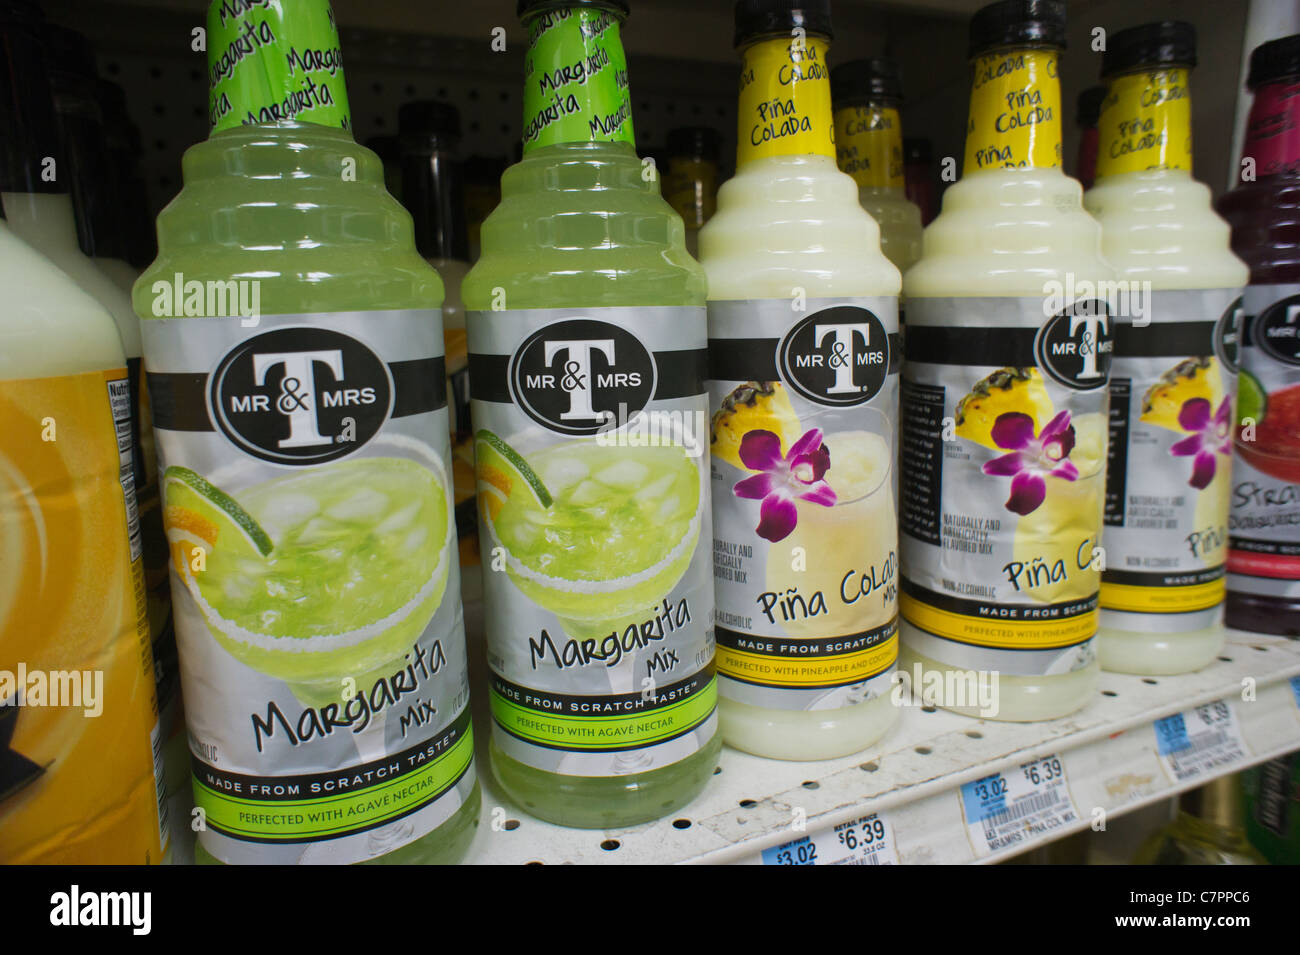 Bottles of premade cocktail mixes are seen on a supermarket shelf in New York Stock Photo